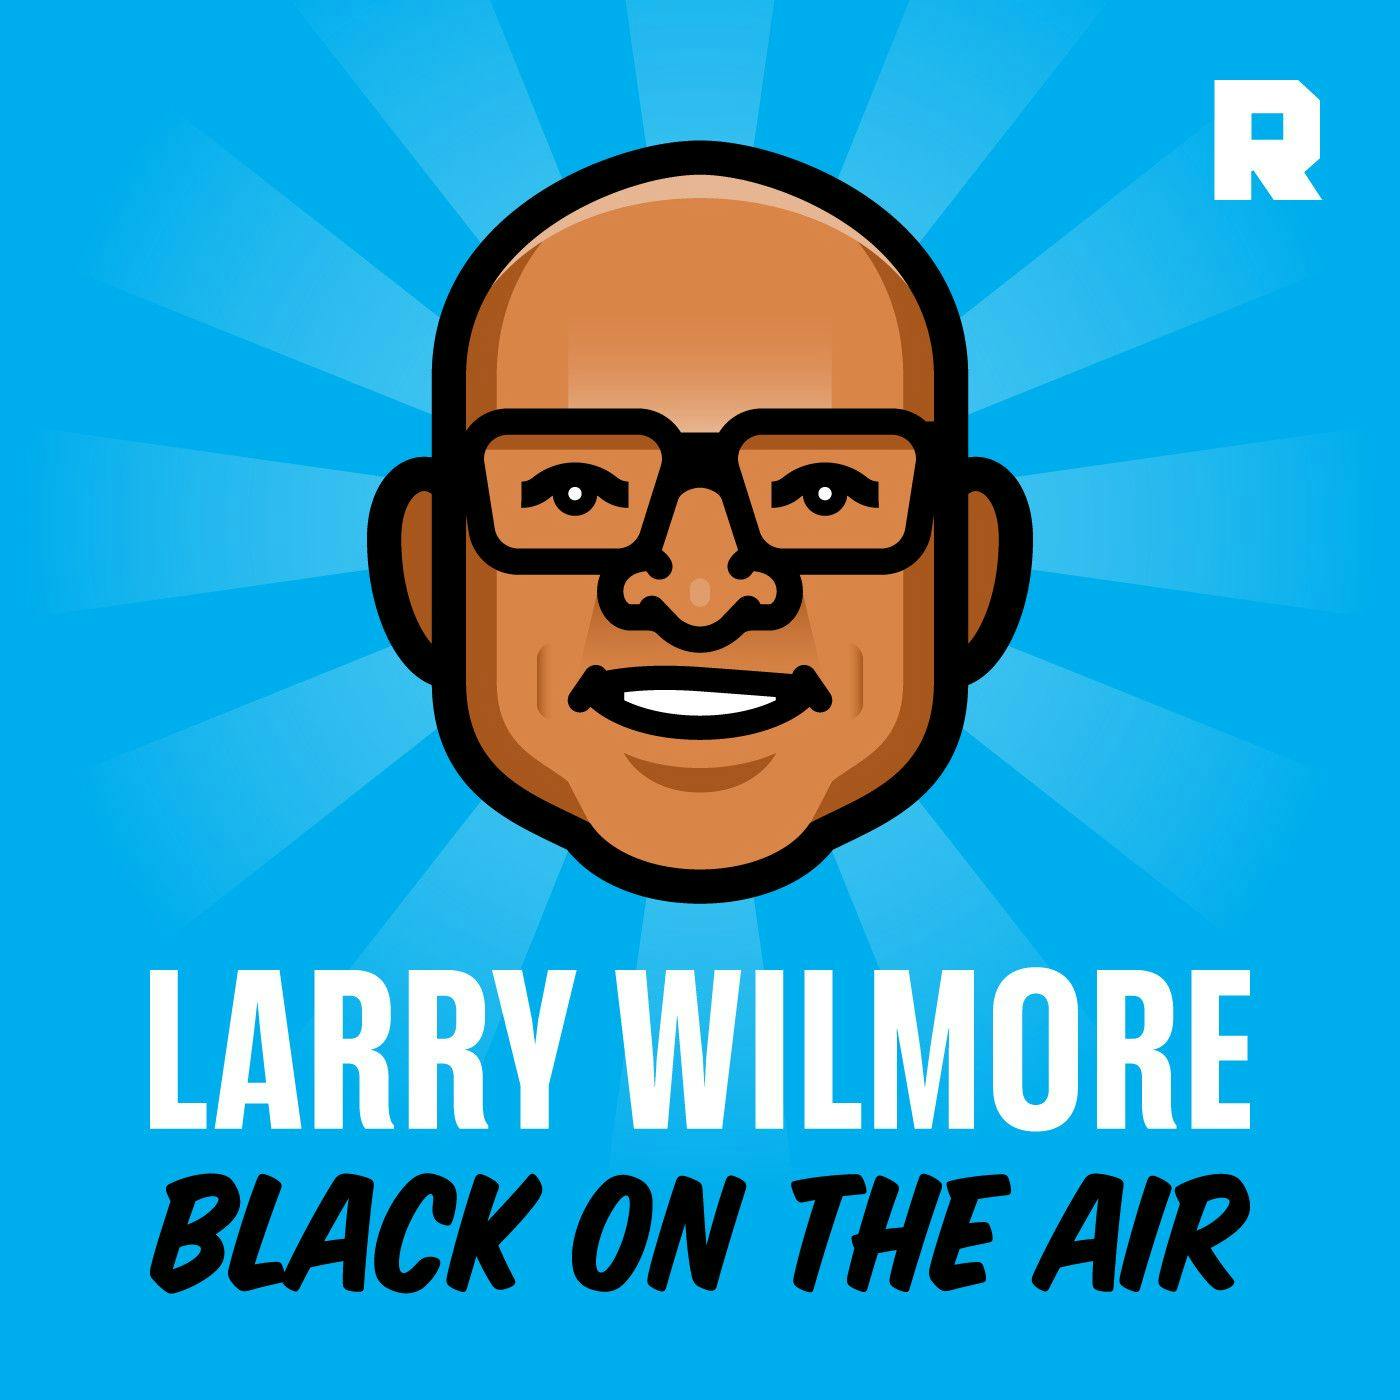 GOP Strategist Rick Wilson on How Republicans Got Here | Larry Wilmore (Ep. 49)